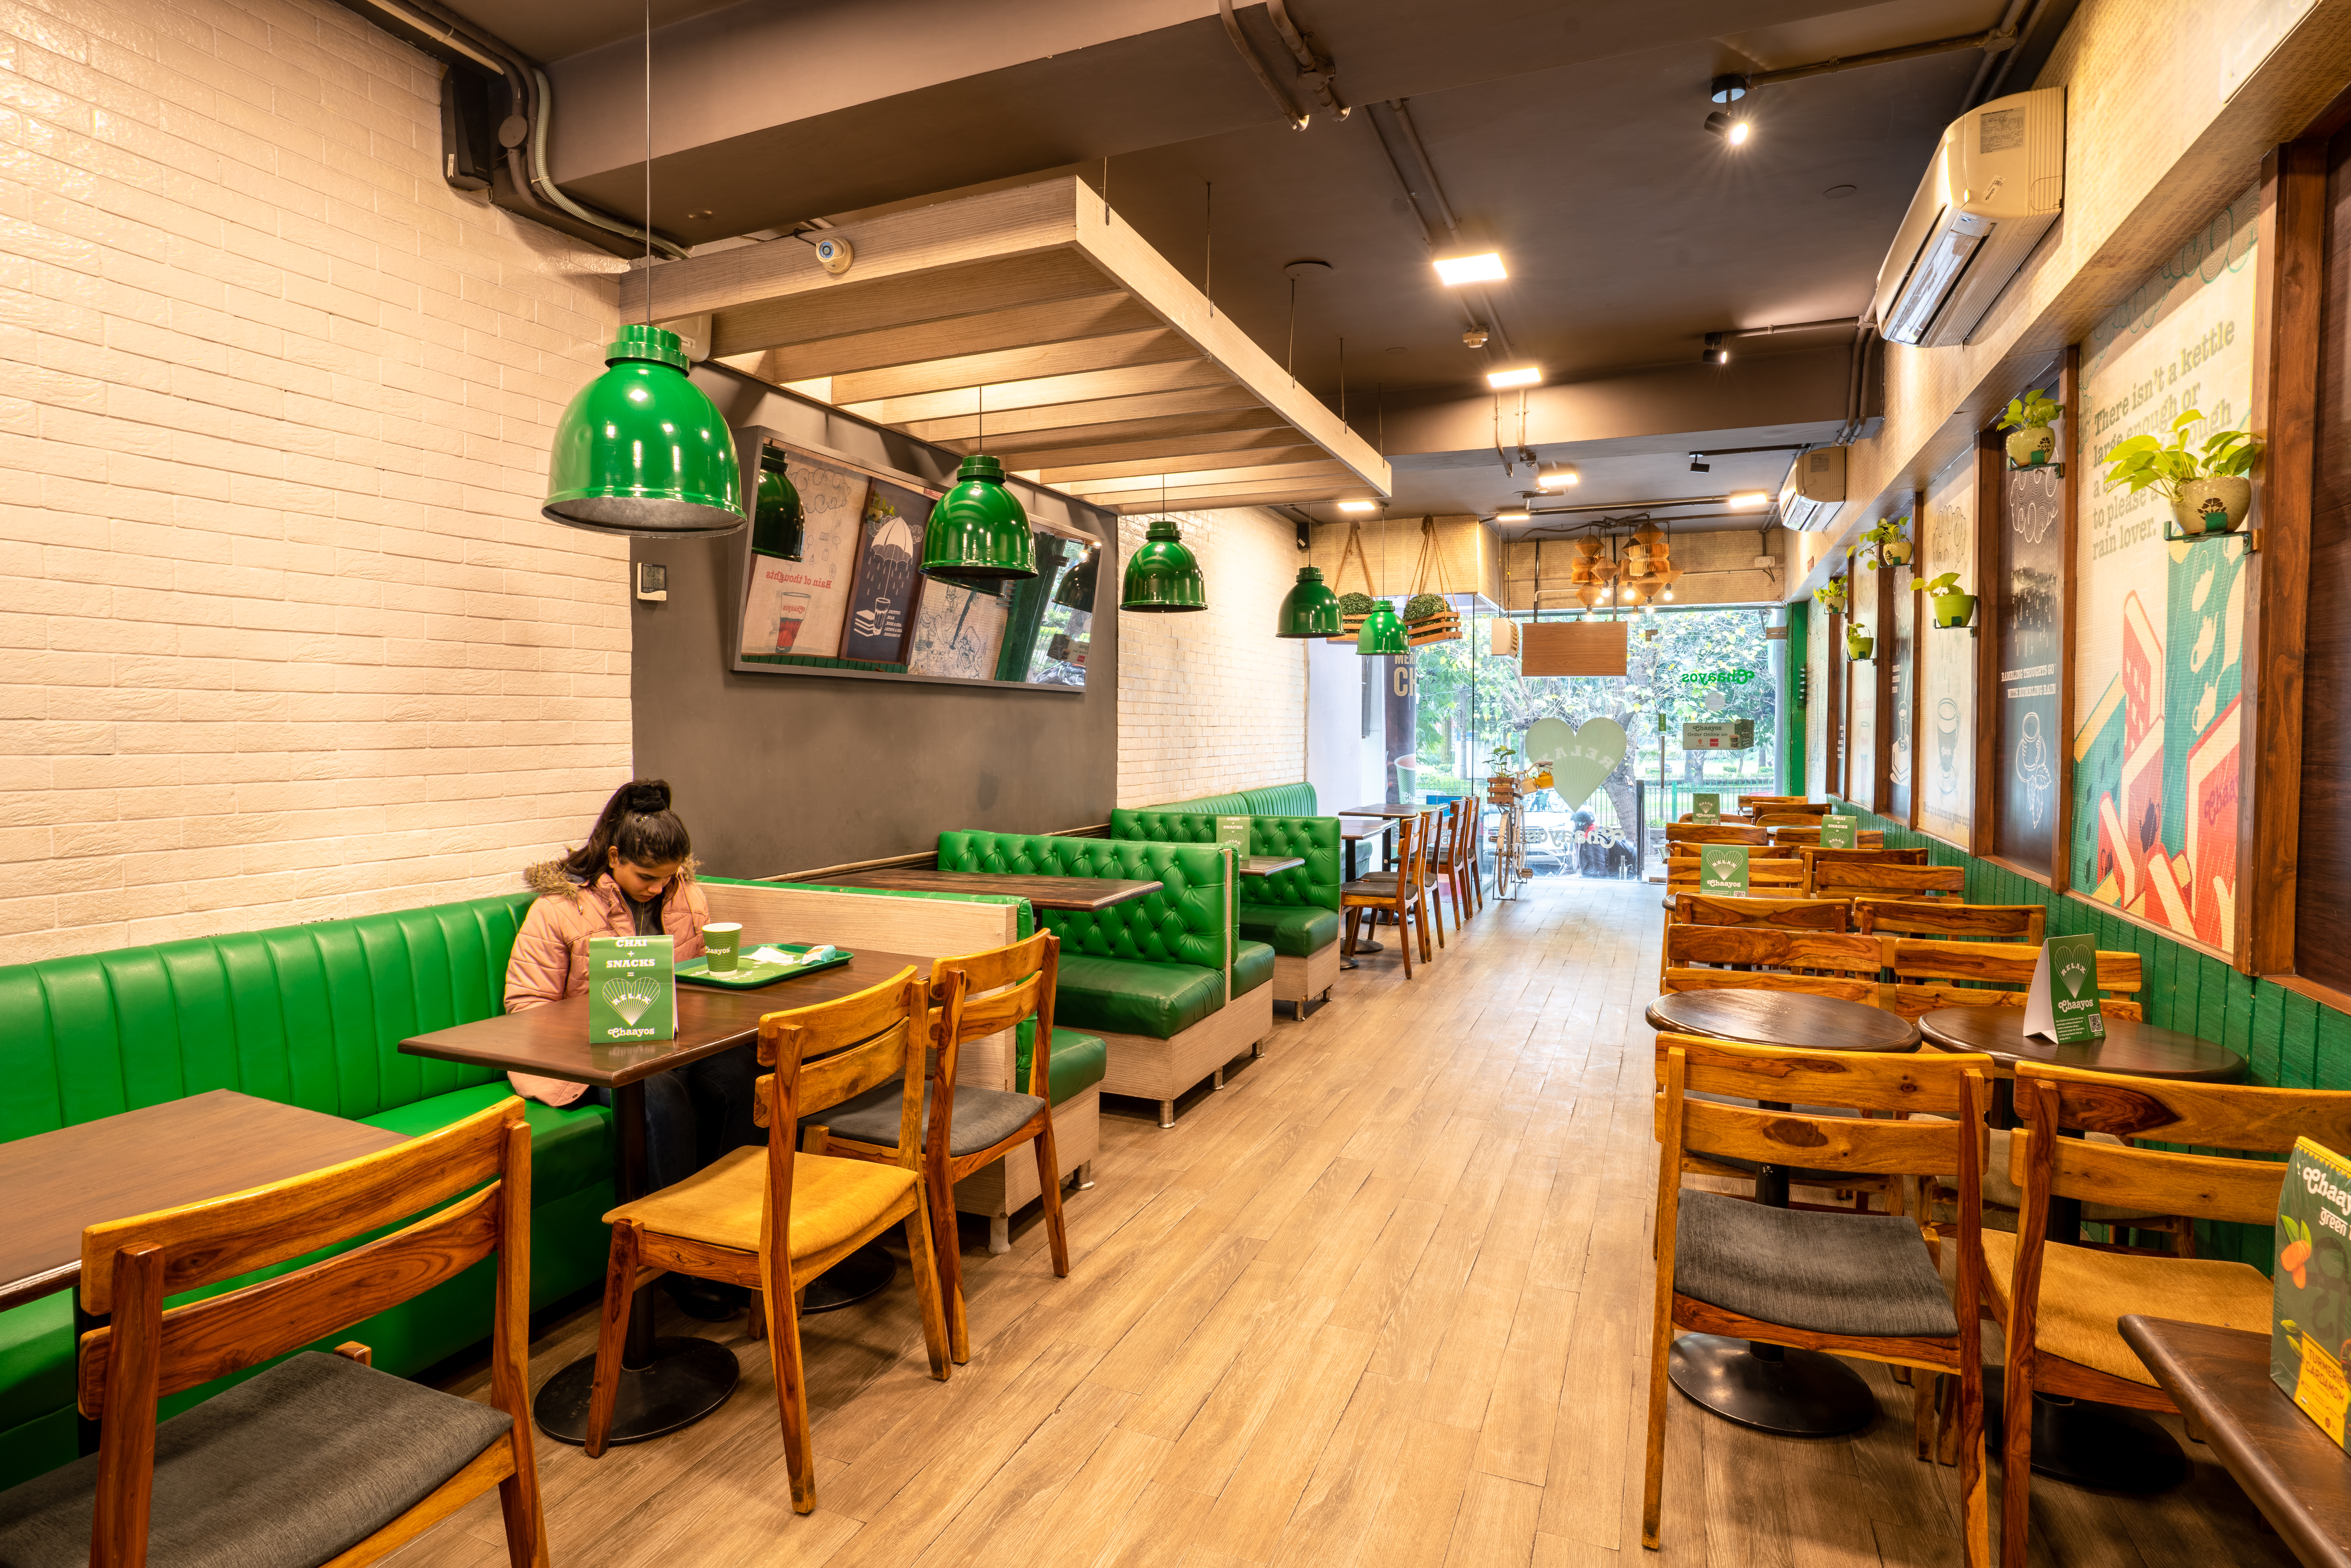 Chaayos Cafe - GK-2 M Block Market, Greater Kailash 2